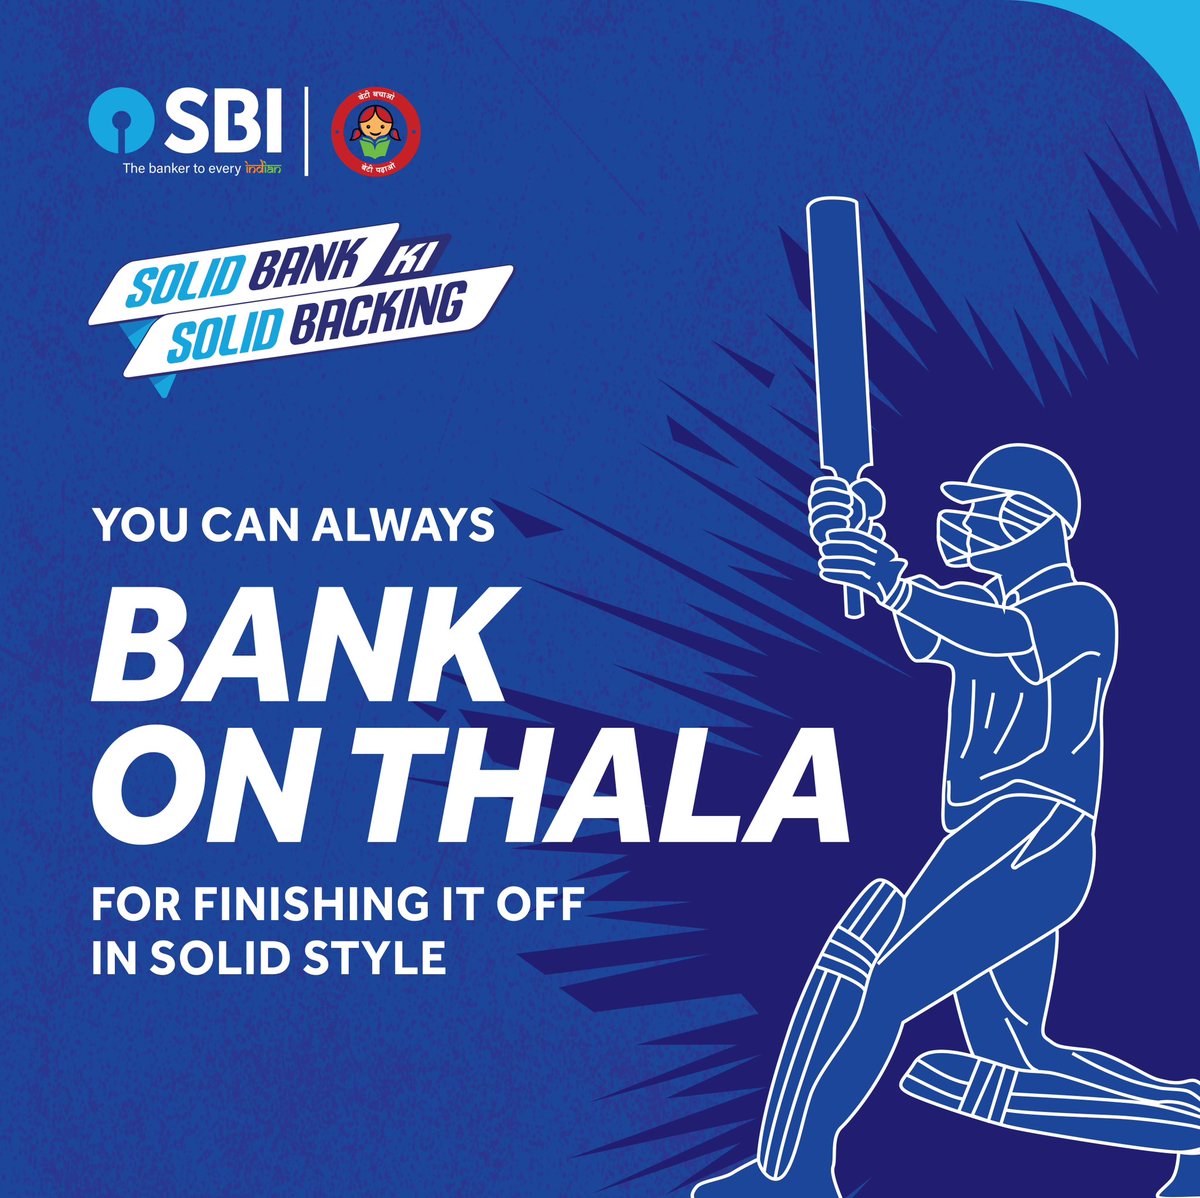 Just like every Indian can bank on SBI for their banking needs! #SBI #SolidBankKiSolidBacking #TheBankerToEveryIndian #Thala @msdhoni